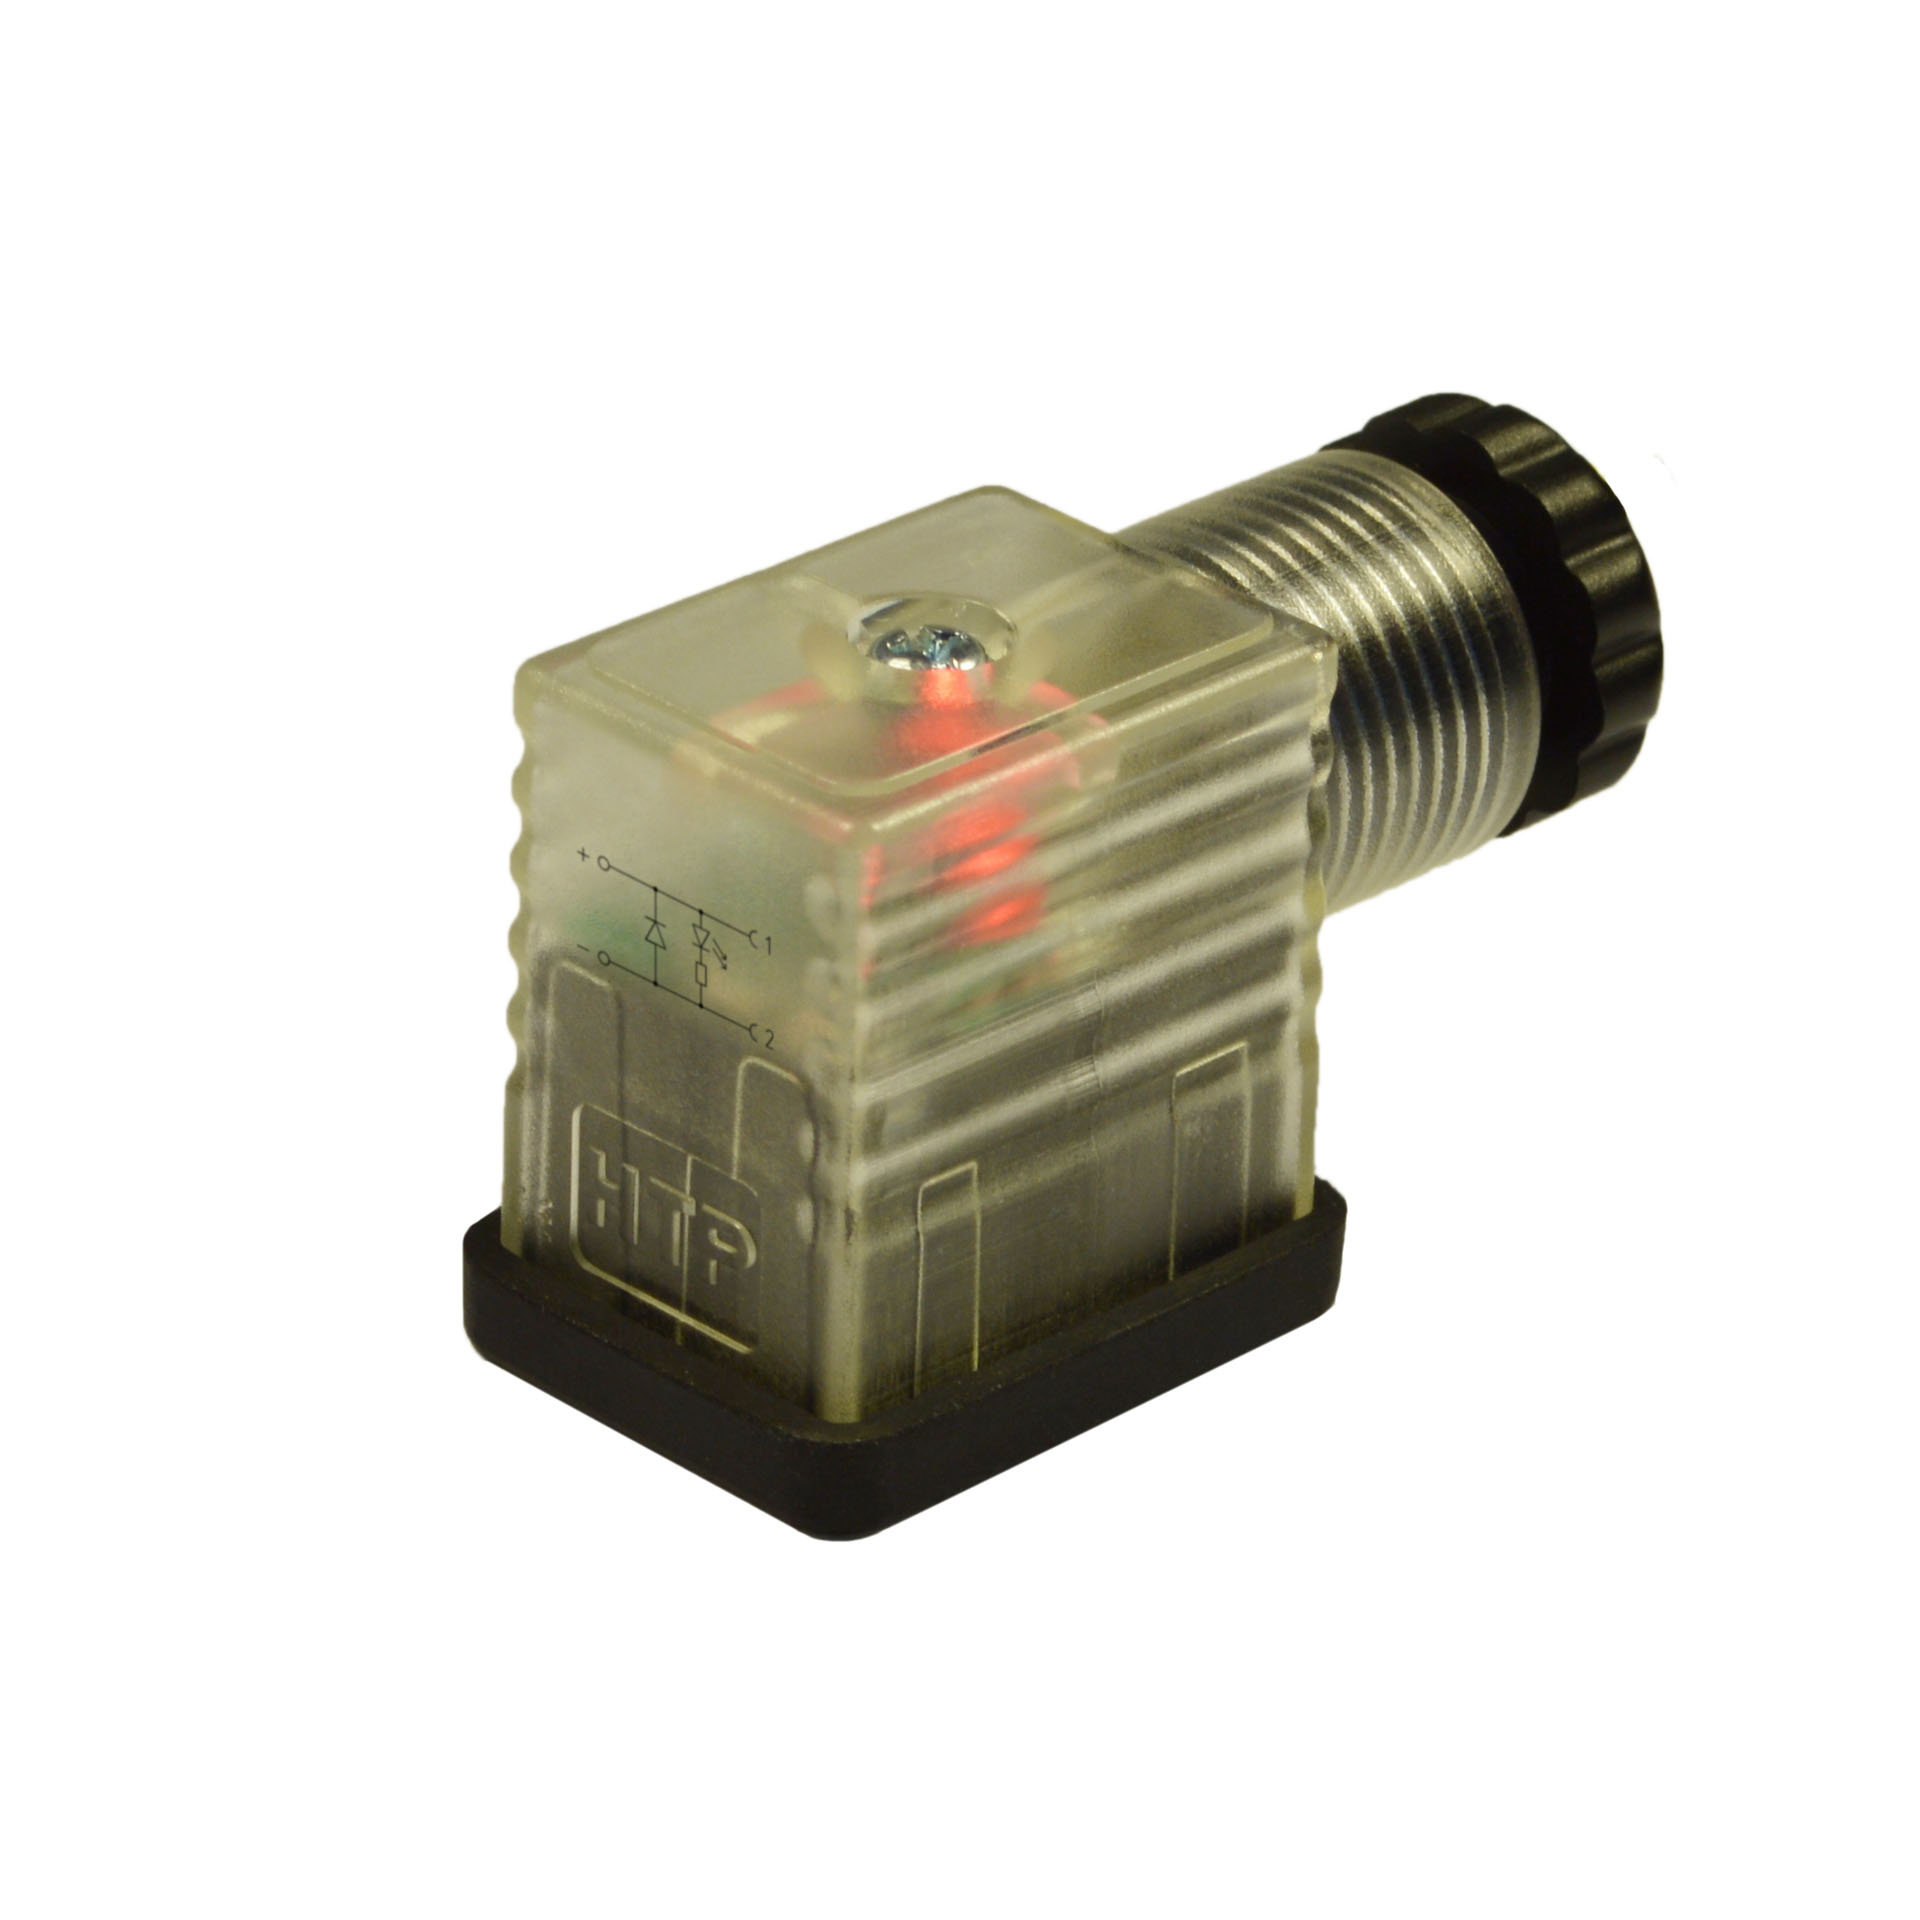 Industrial standard(typeB)field attachable,2p+PE(h.12),red LED+diode,115VAC/DC,PG9